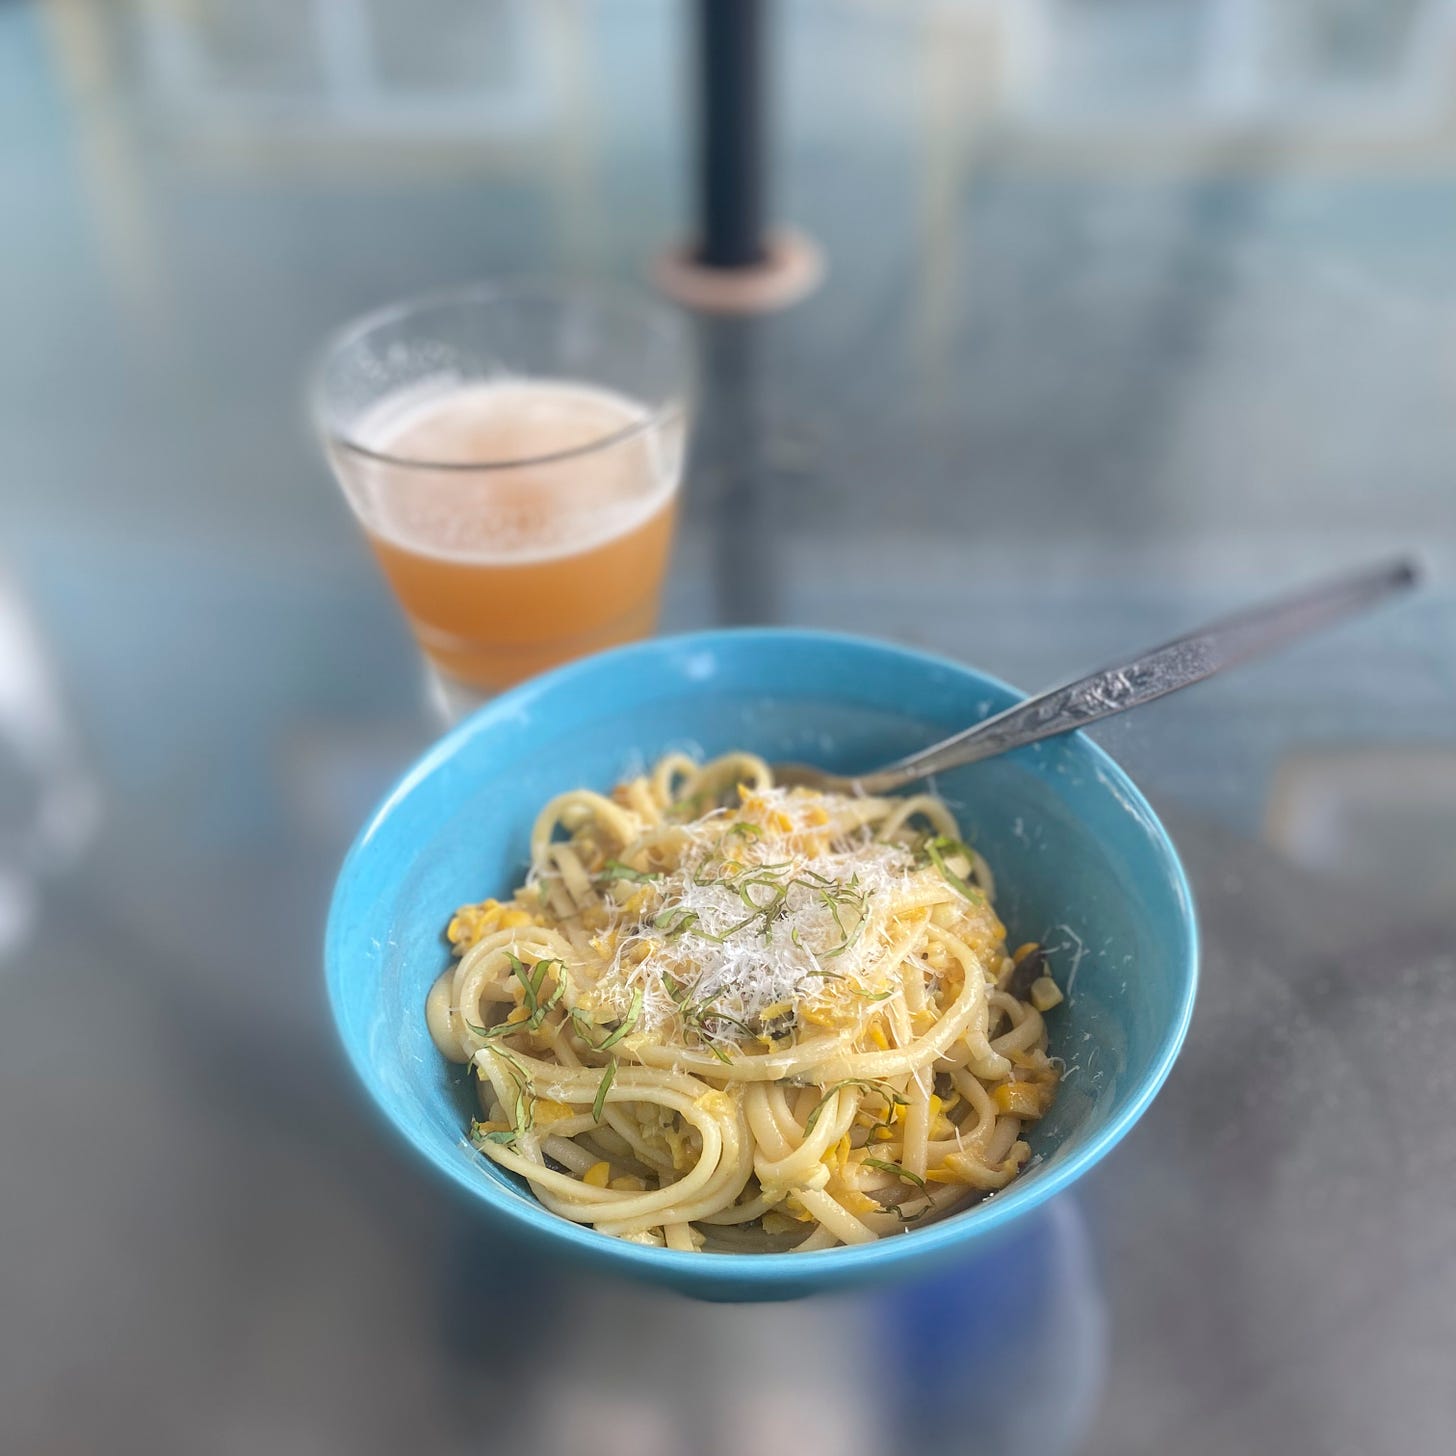 A blue bowl of linguine in the corn, olive, & zucchini mixture described above, topped with parmesan and basil chiffonade. A fork sticks out of the back of the bowl, and a glass of beer is on the table in the background.